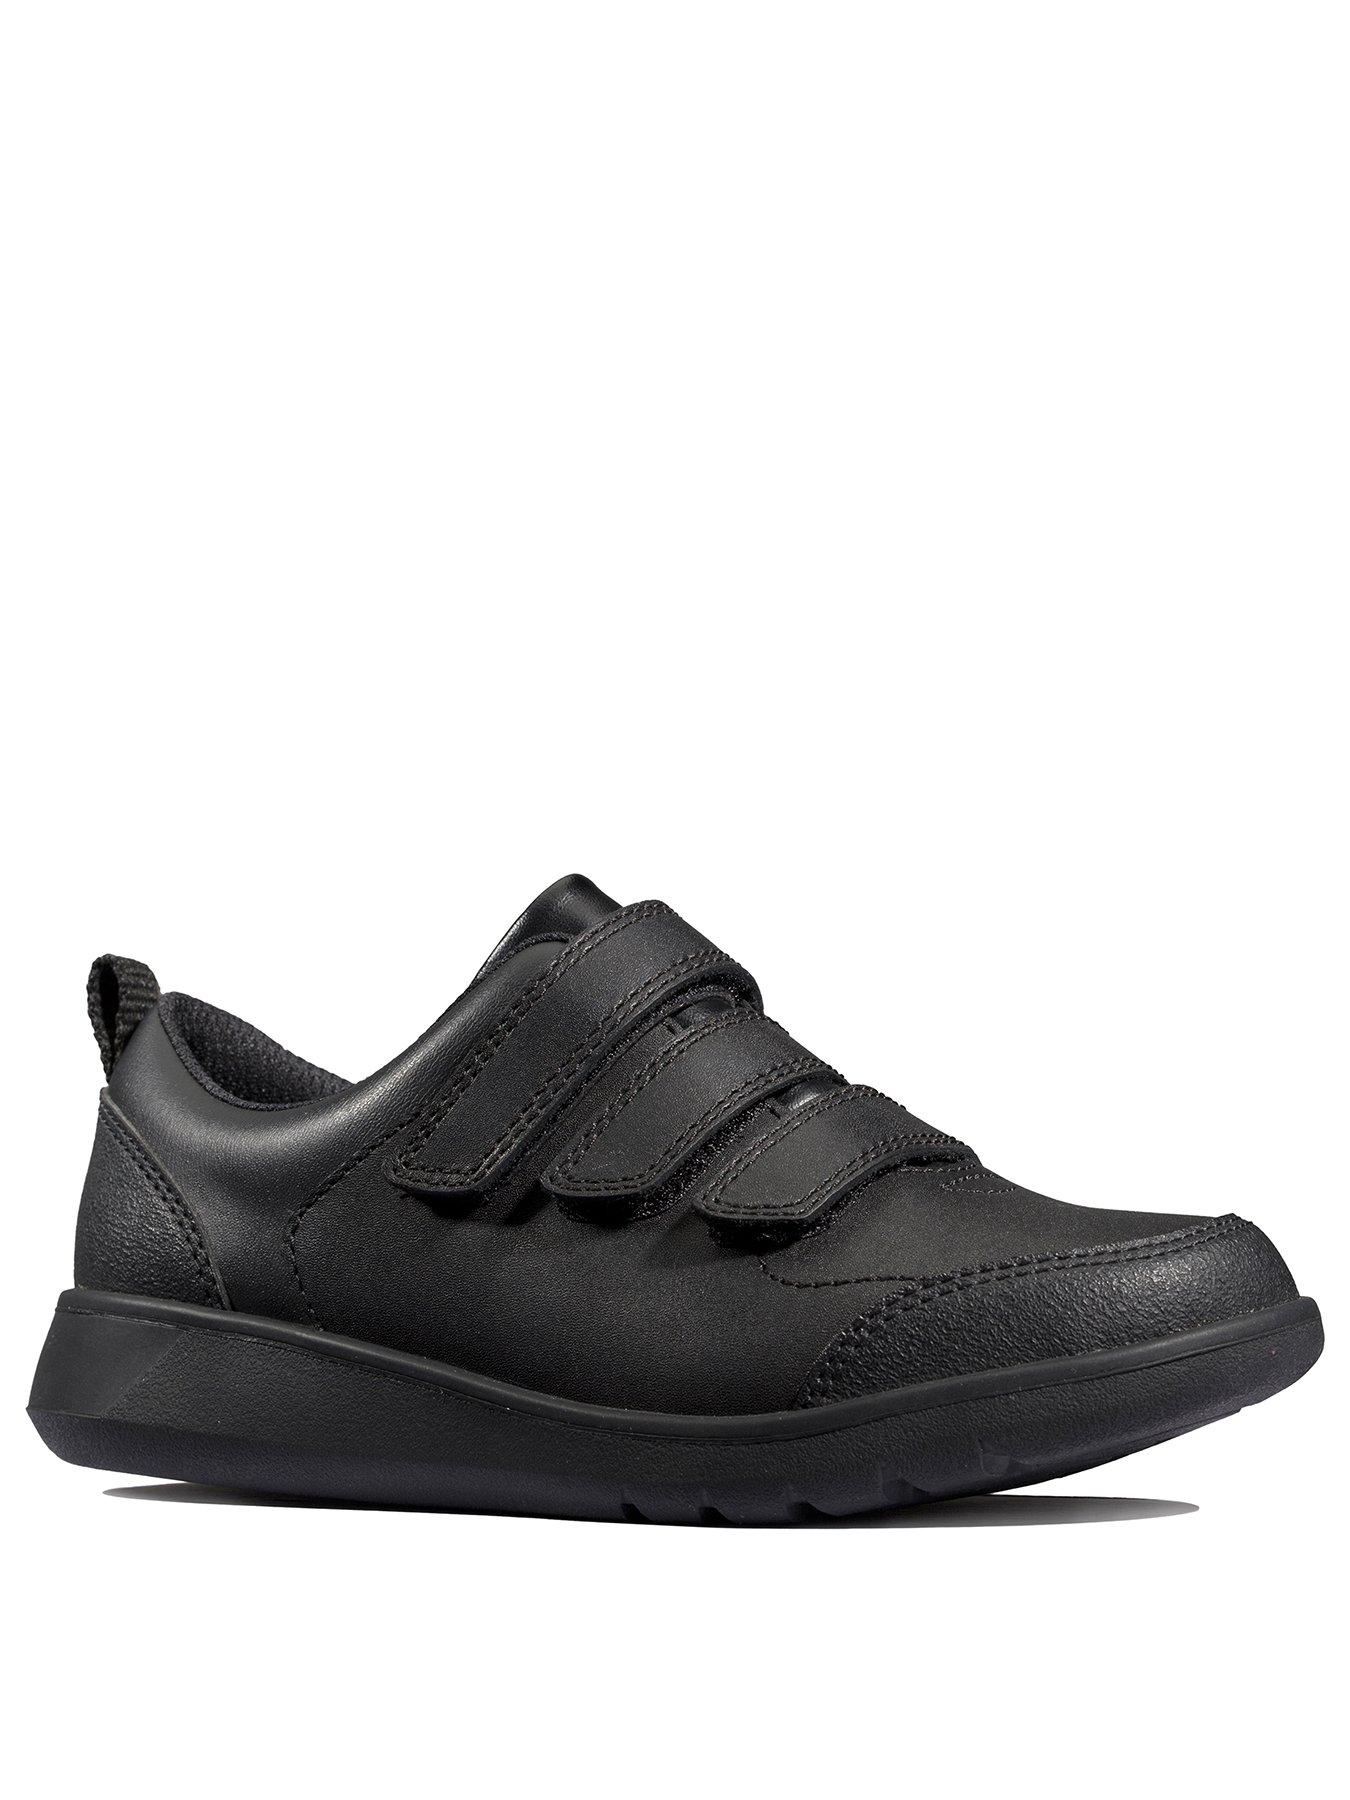  Boys Youth Scape Sky Strap School Shoes - Black Leather